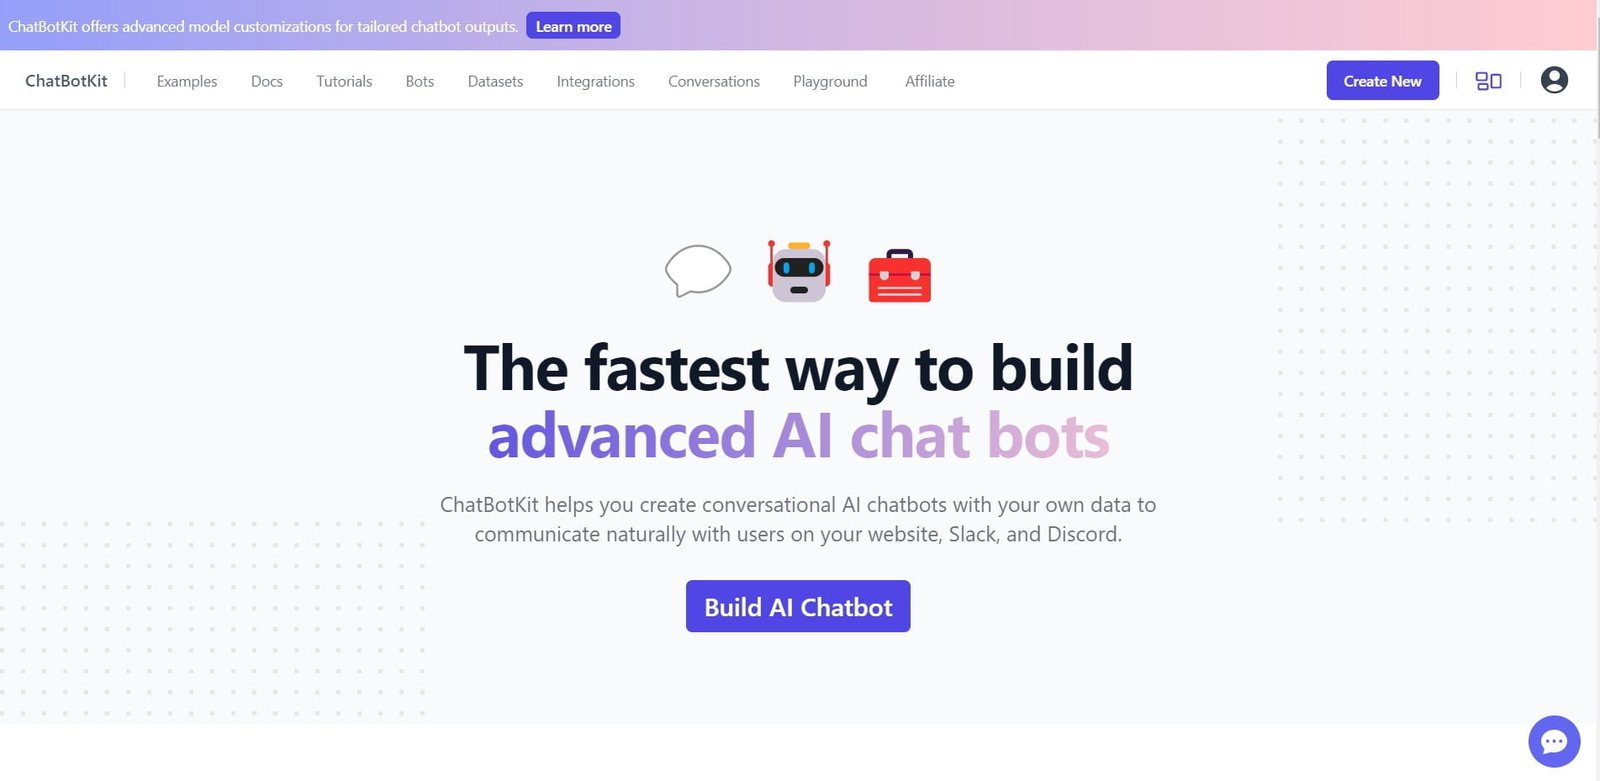 ChatBotKit is an AI chatbot builder that empowers users to create conversational AI chatbots using custom datasets and skill sets.